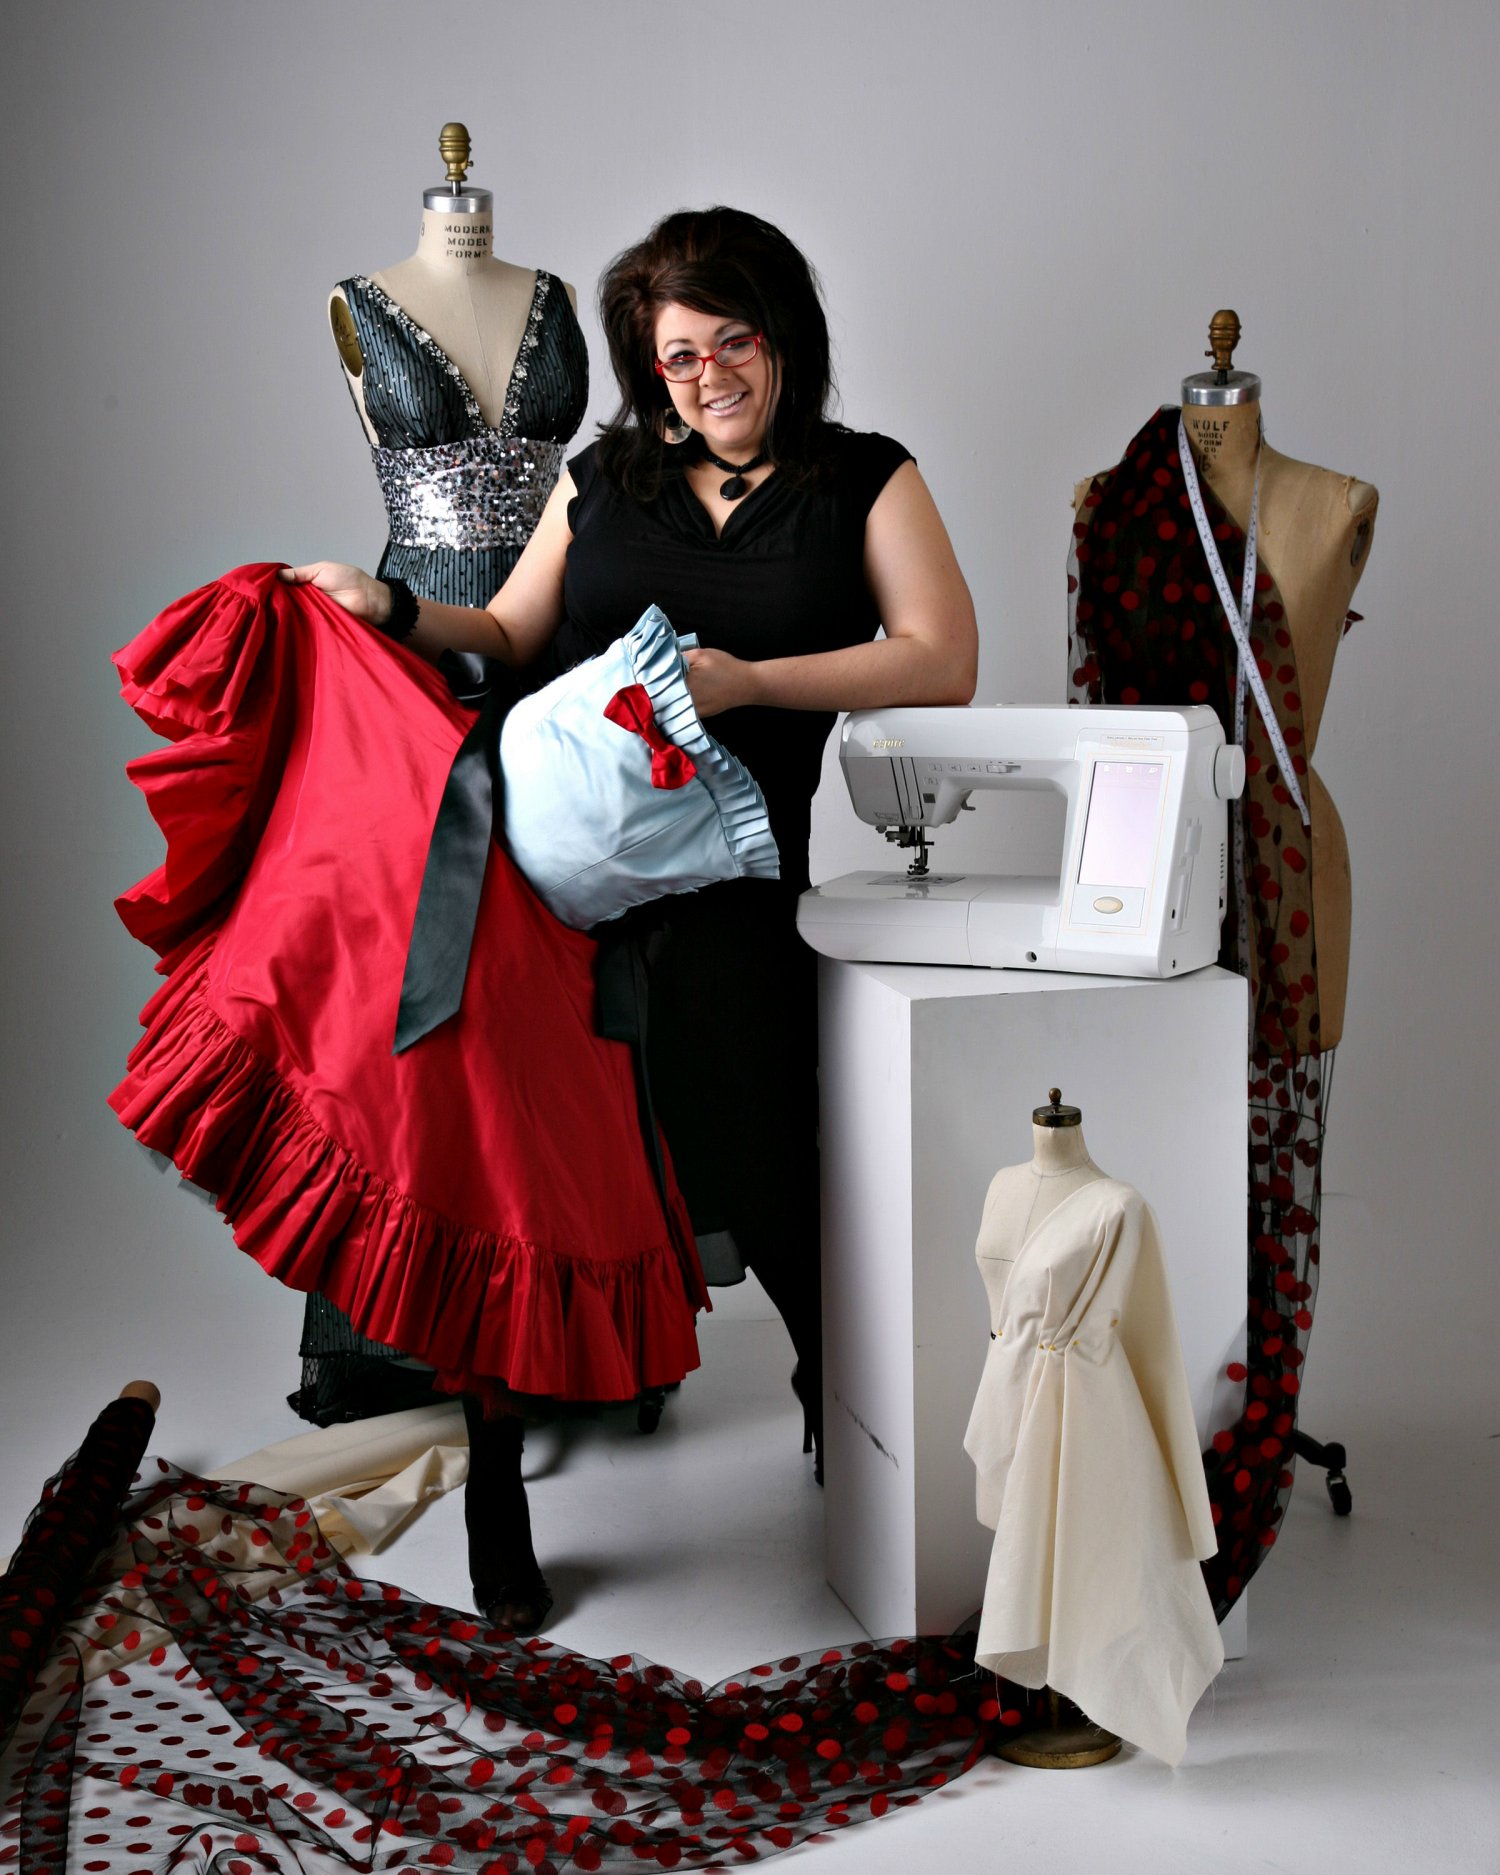 Quilting Costumes Fashion Sewing And ‘sew’ Much More At American Sewing Expo Opening Friday